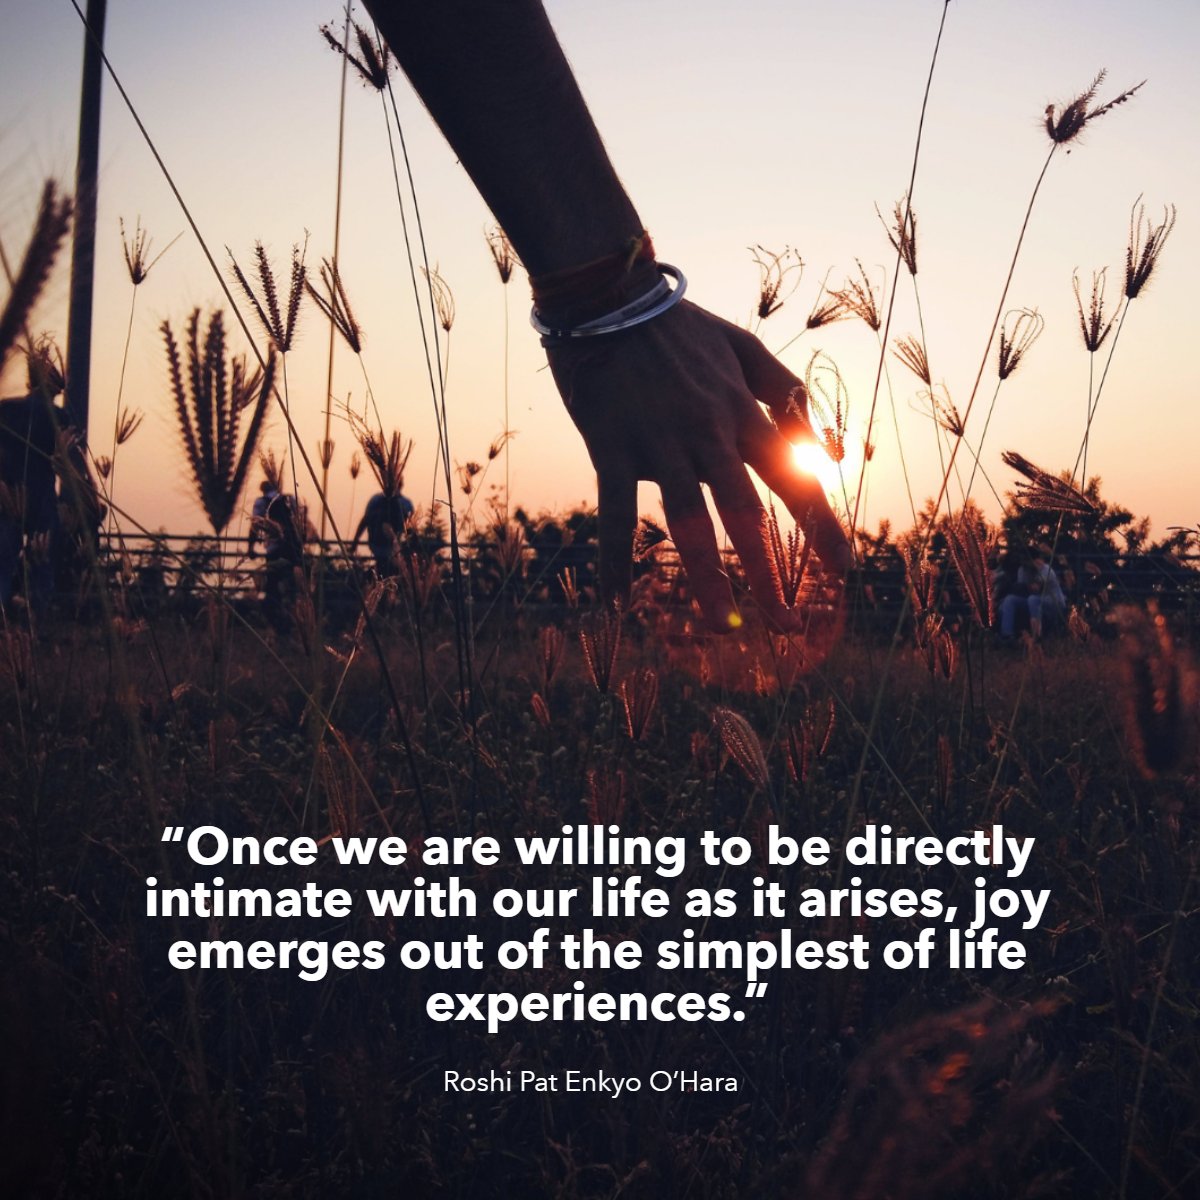 'Once we are willing to be directly intimate with our life as it arises, joy emerges out of the simplest of life experiences'
— Roshi Pat Enkya O'Hara 🤗

#quotes #happinessbegins #happinesscomesfromwithin #happiness❤️ #happinessiskey #quotestagram
 #kimblue